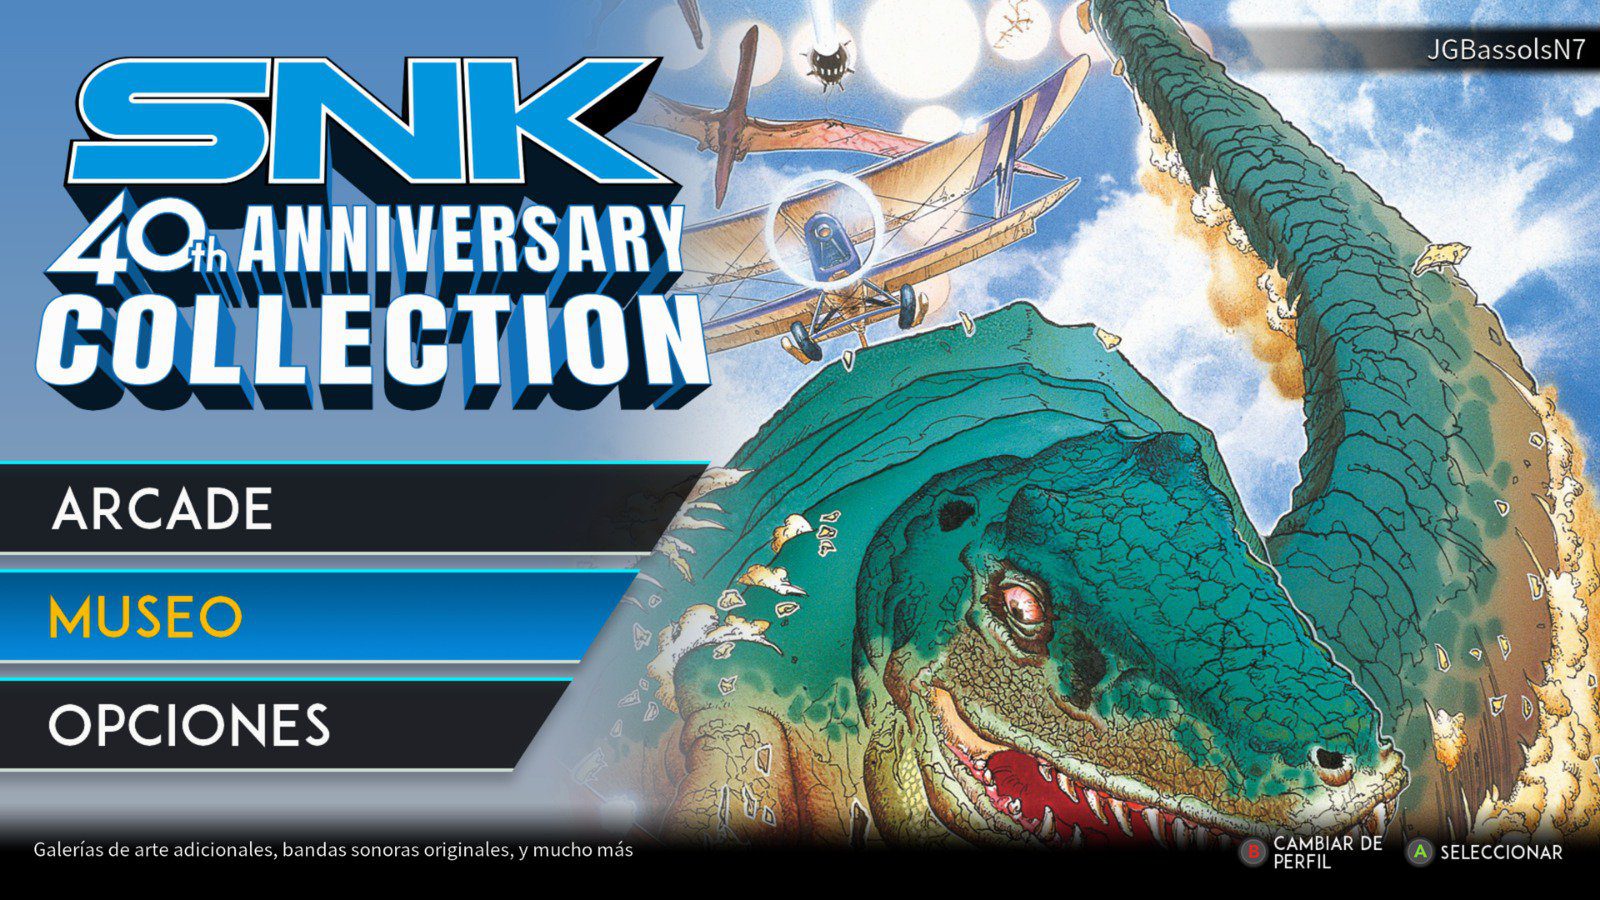 SNK 40th Anniversary Colection